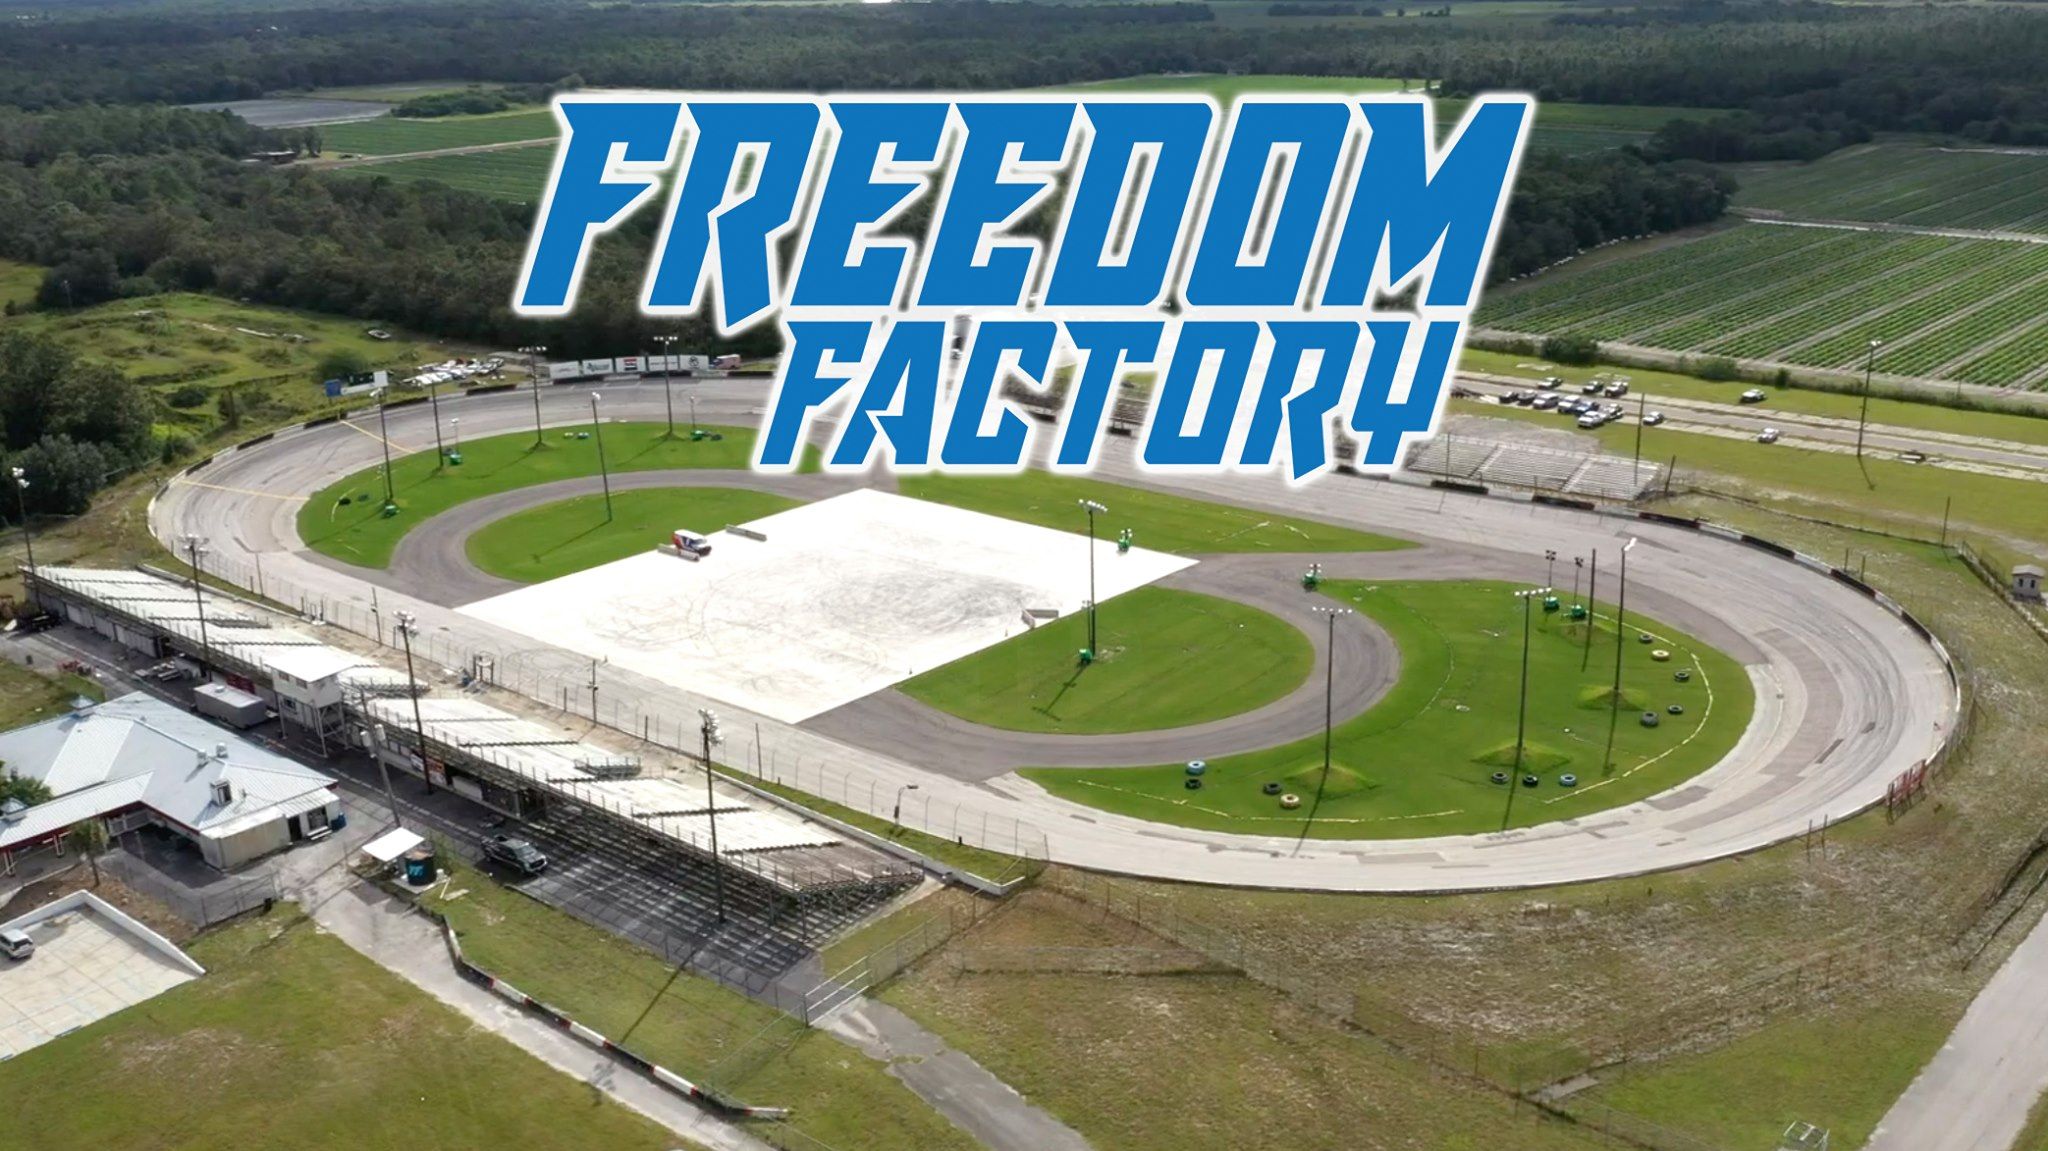 Here's Why Cleetus McFarland's Freedom Factory Is In Trouble